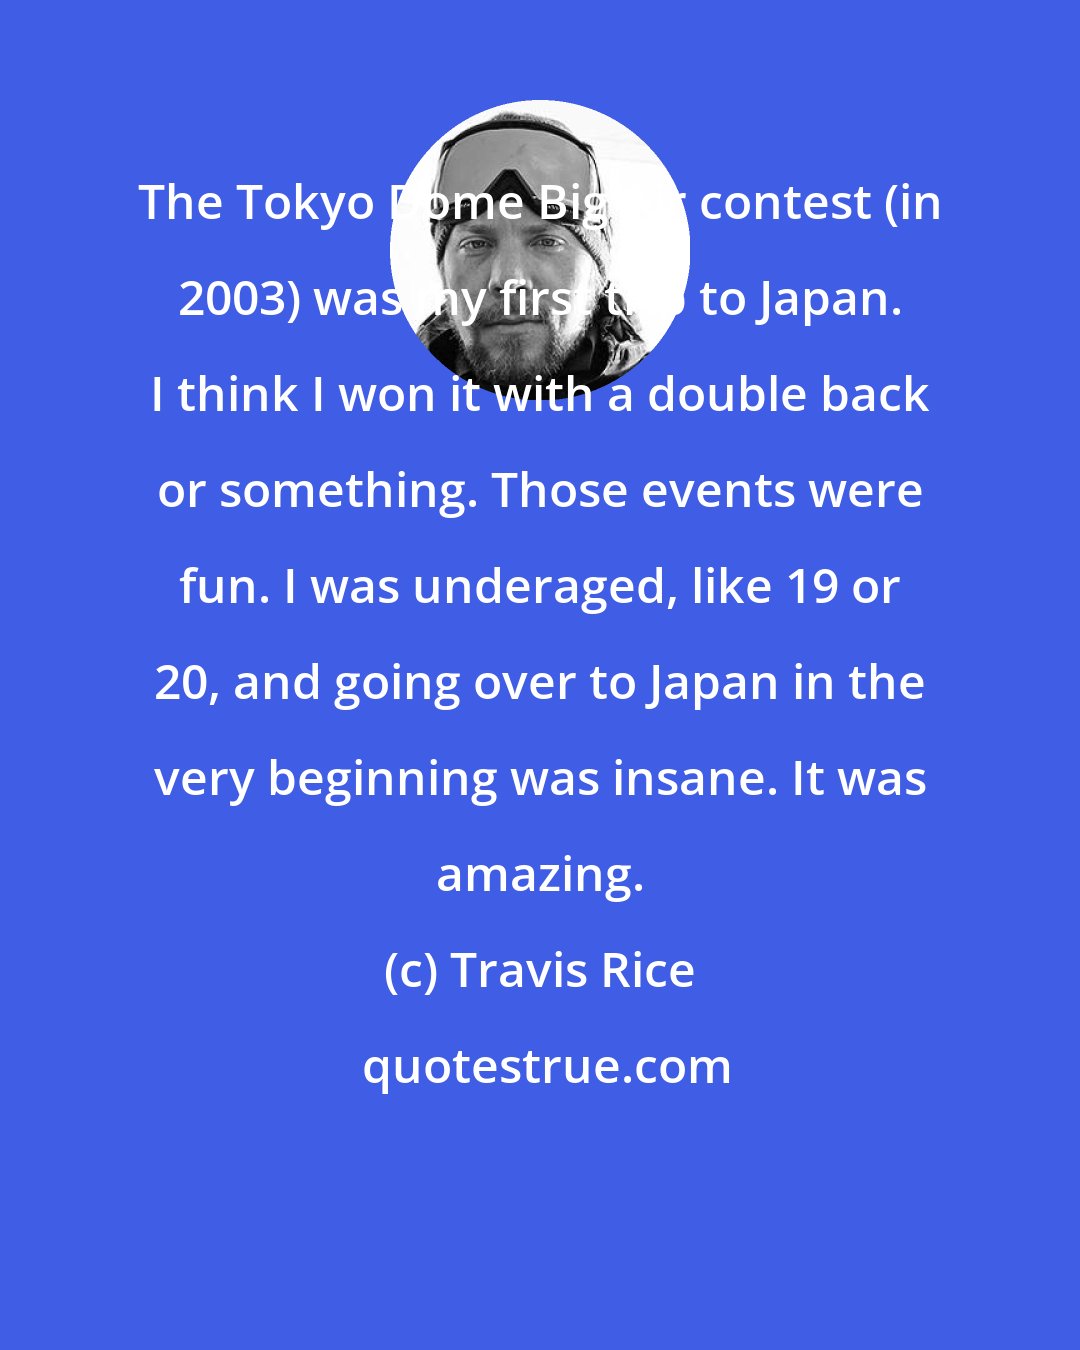 Travis Rice: The Tokyo Dome Big Air contest (in 2003) was my first trip to Japan. I think I won it with a double back or something. Those events were fun. I was underaged, like 19 or 20, and going over to Japan in the very beginning was insane. It was amazing.